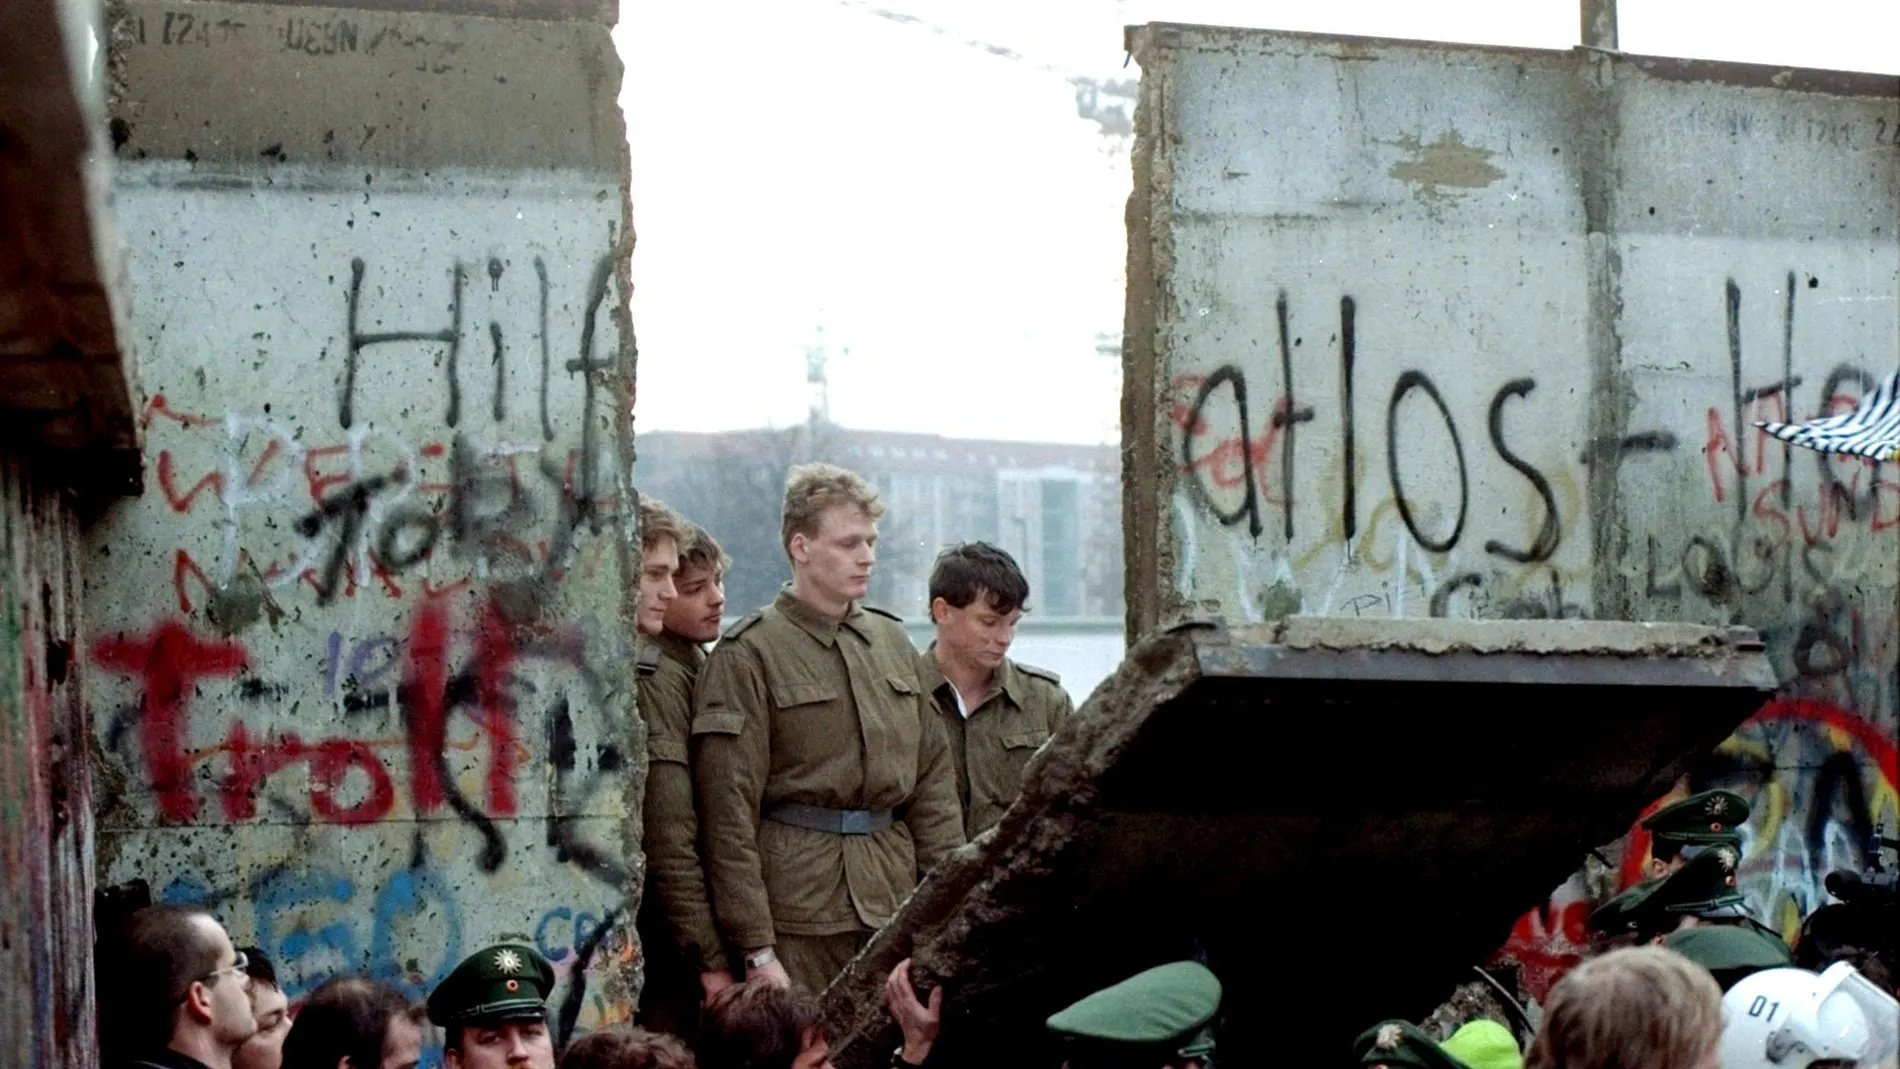 East German border guards look through a hole in the Berlin Wall after demonstrators pulled down the segment at Brandenburg Gate in Berlin, in this Nov. 11, 1989.